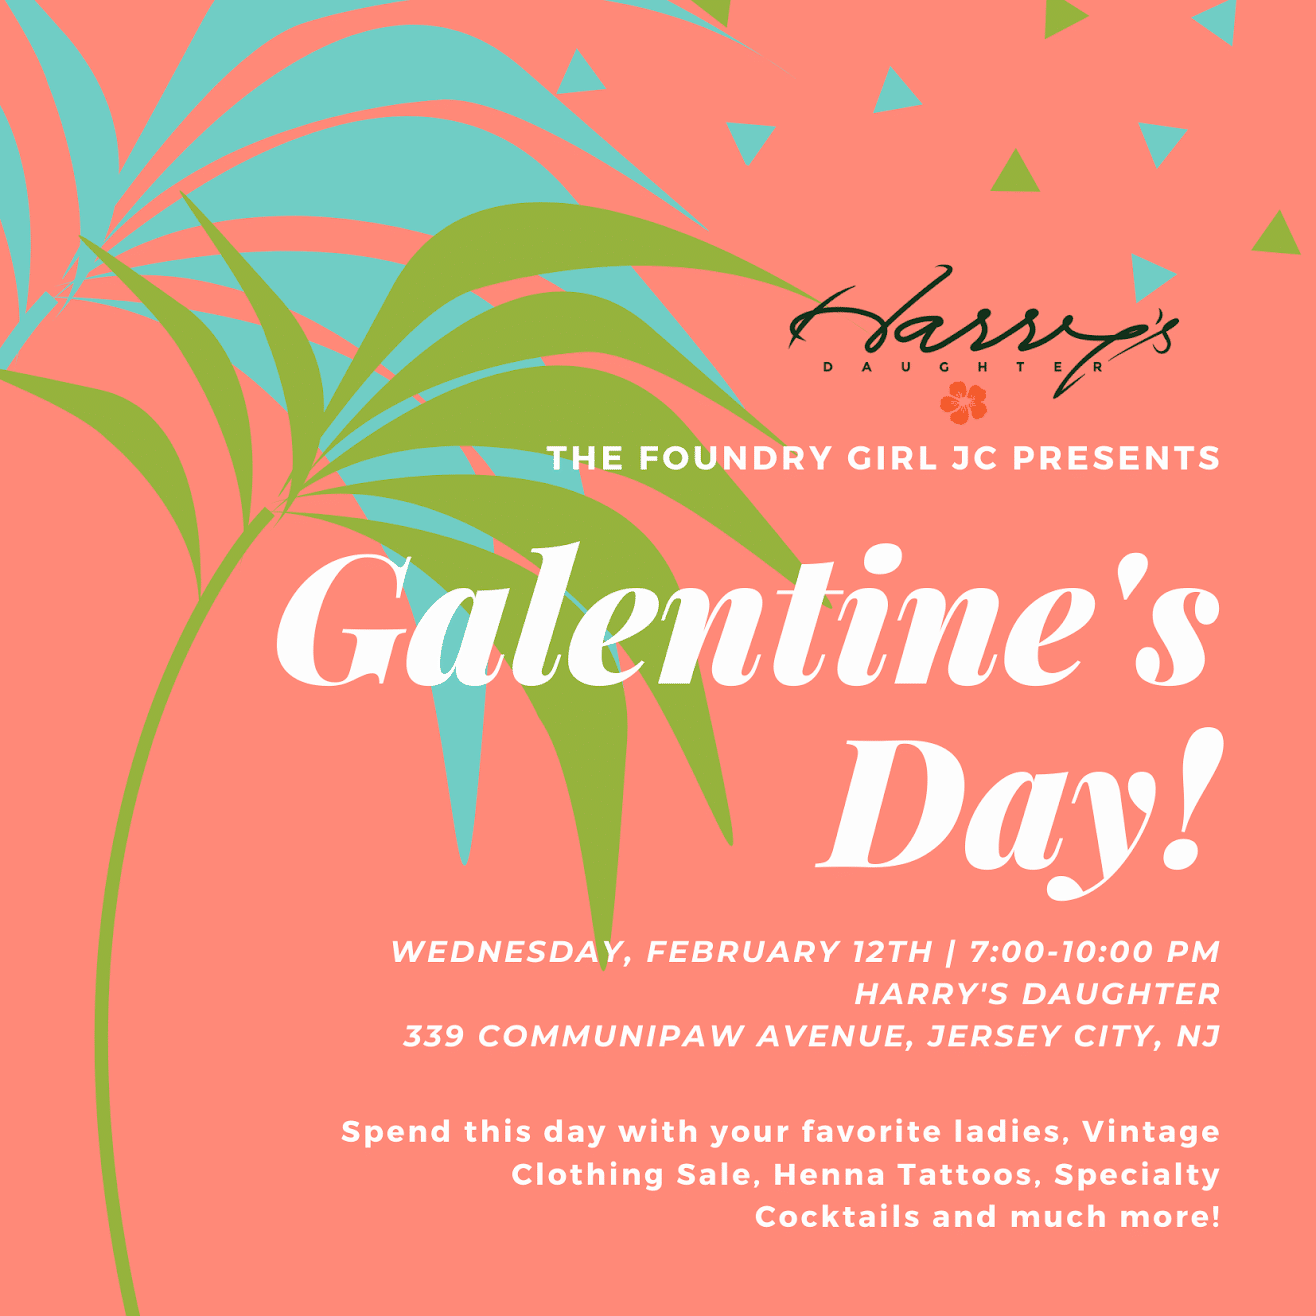 foundry girl galentines day